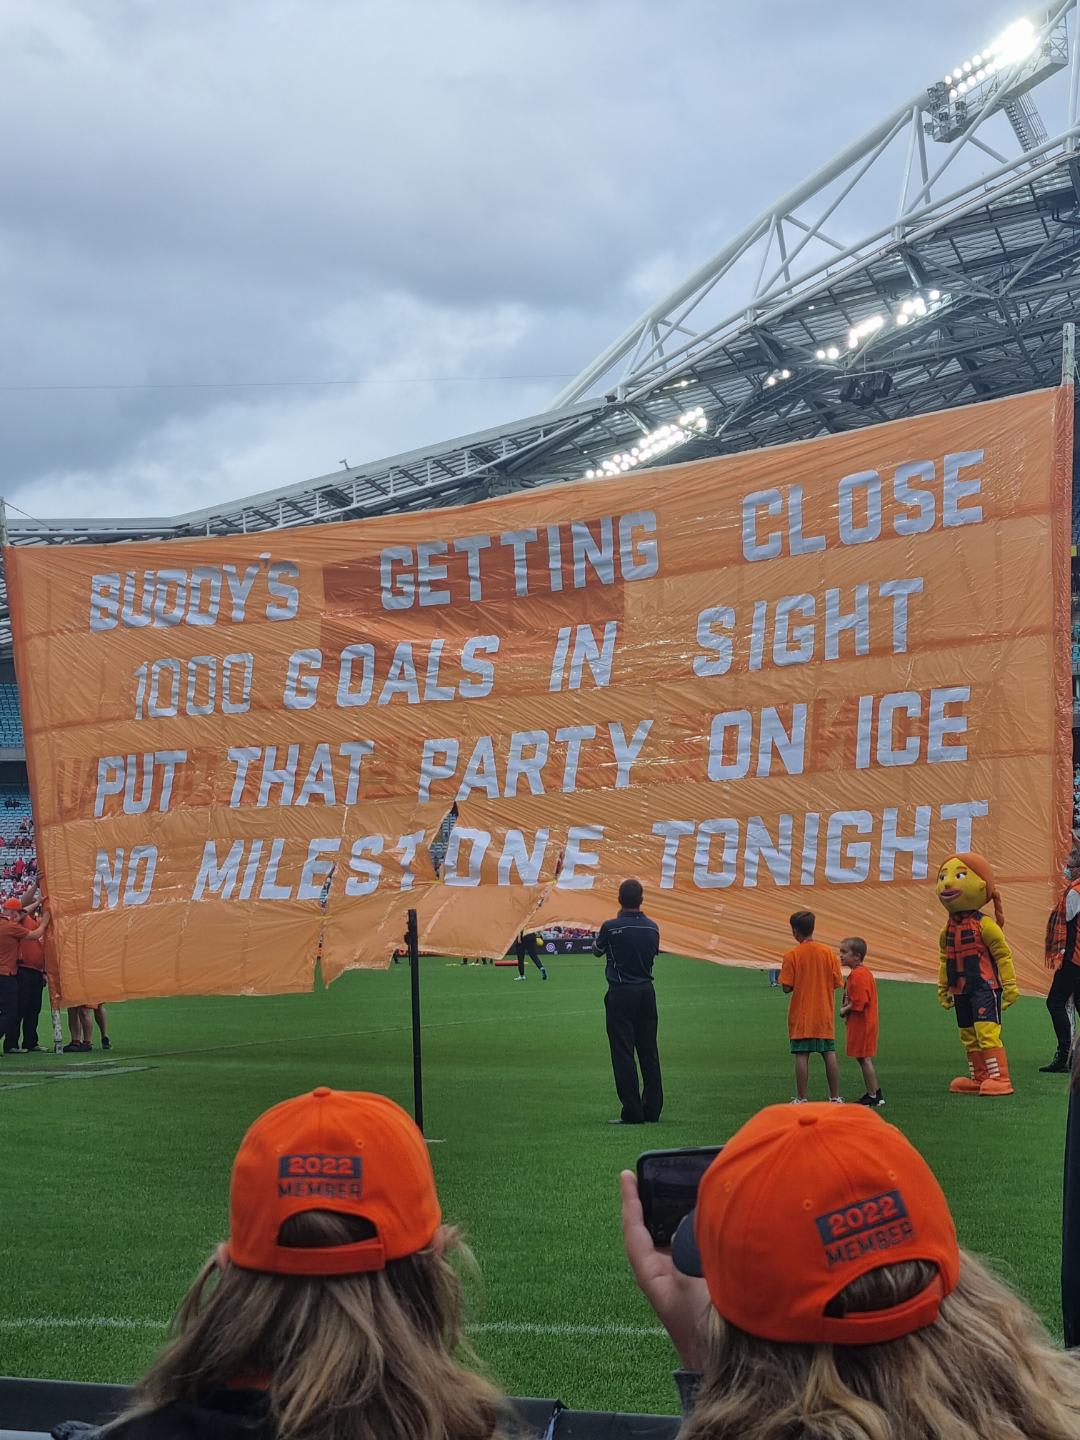 The Giants are making a big call with their banner tonight